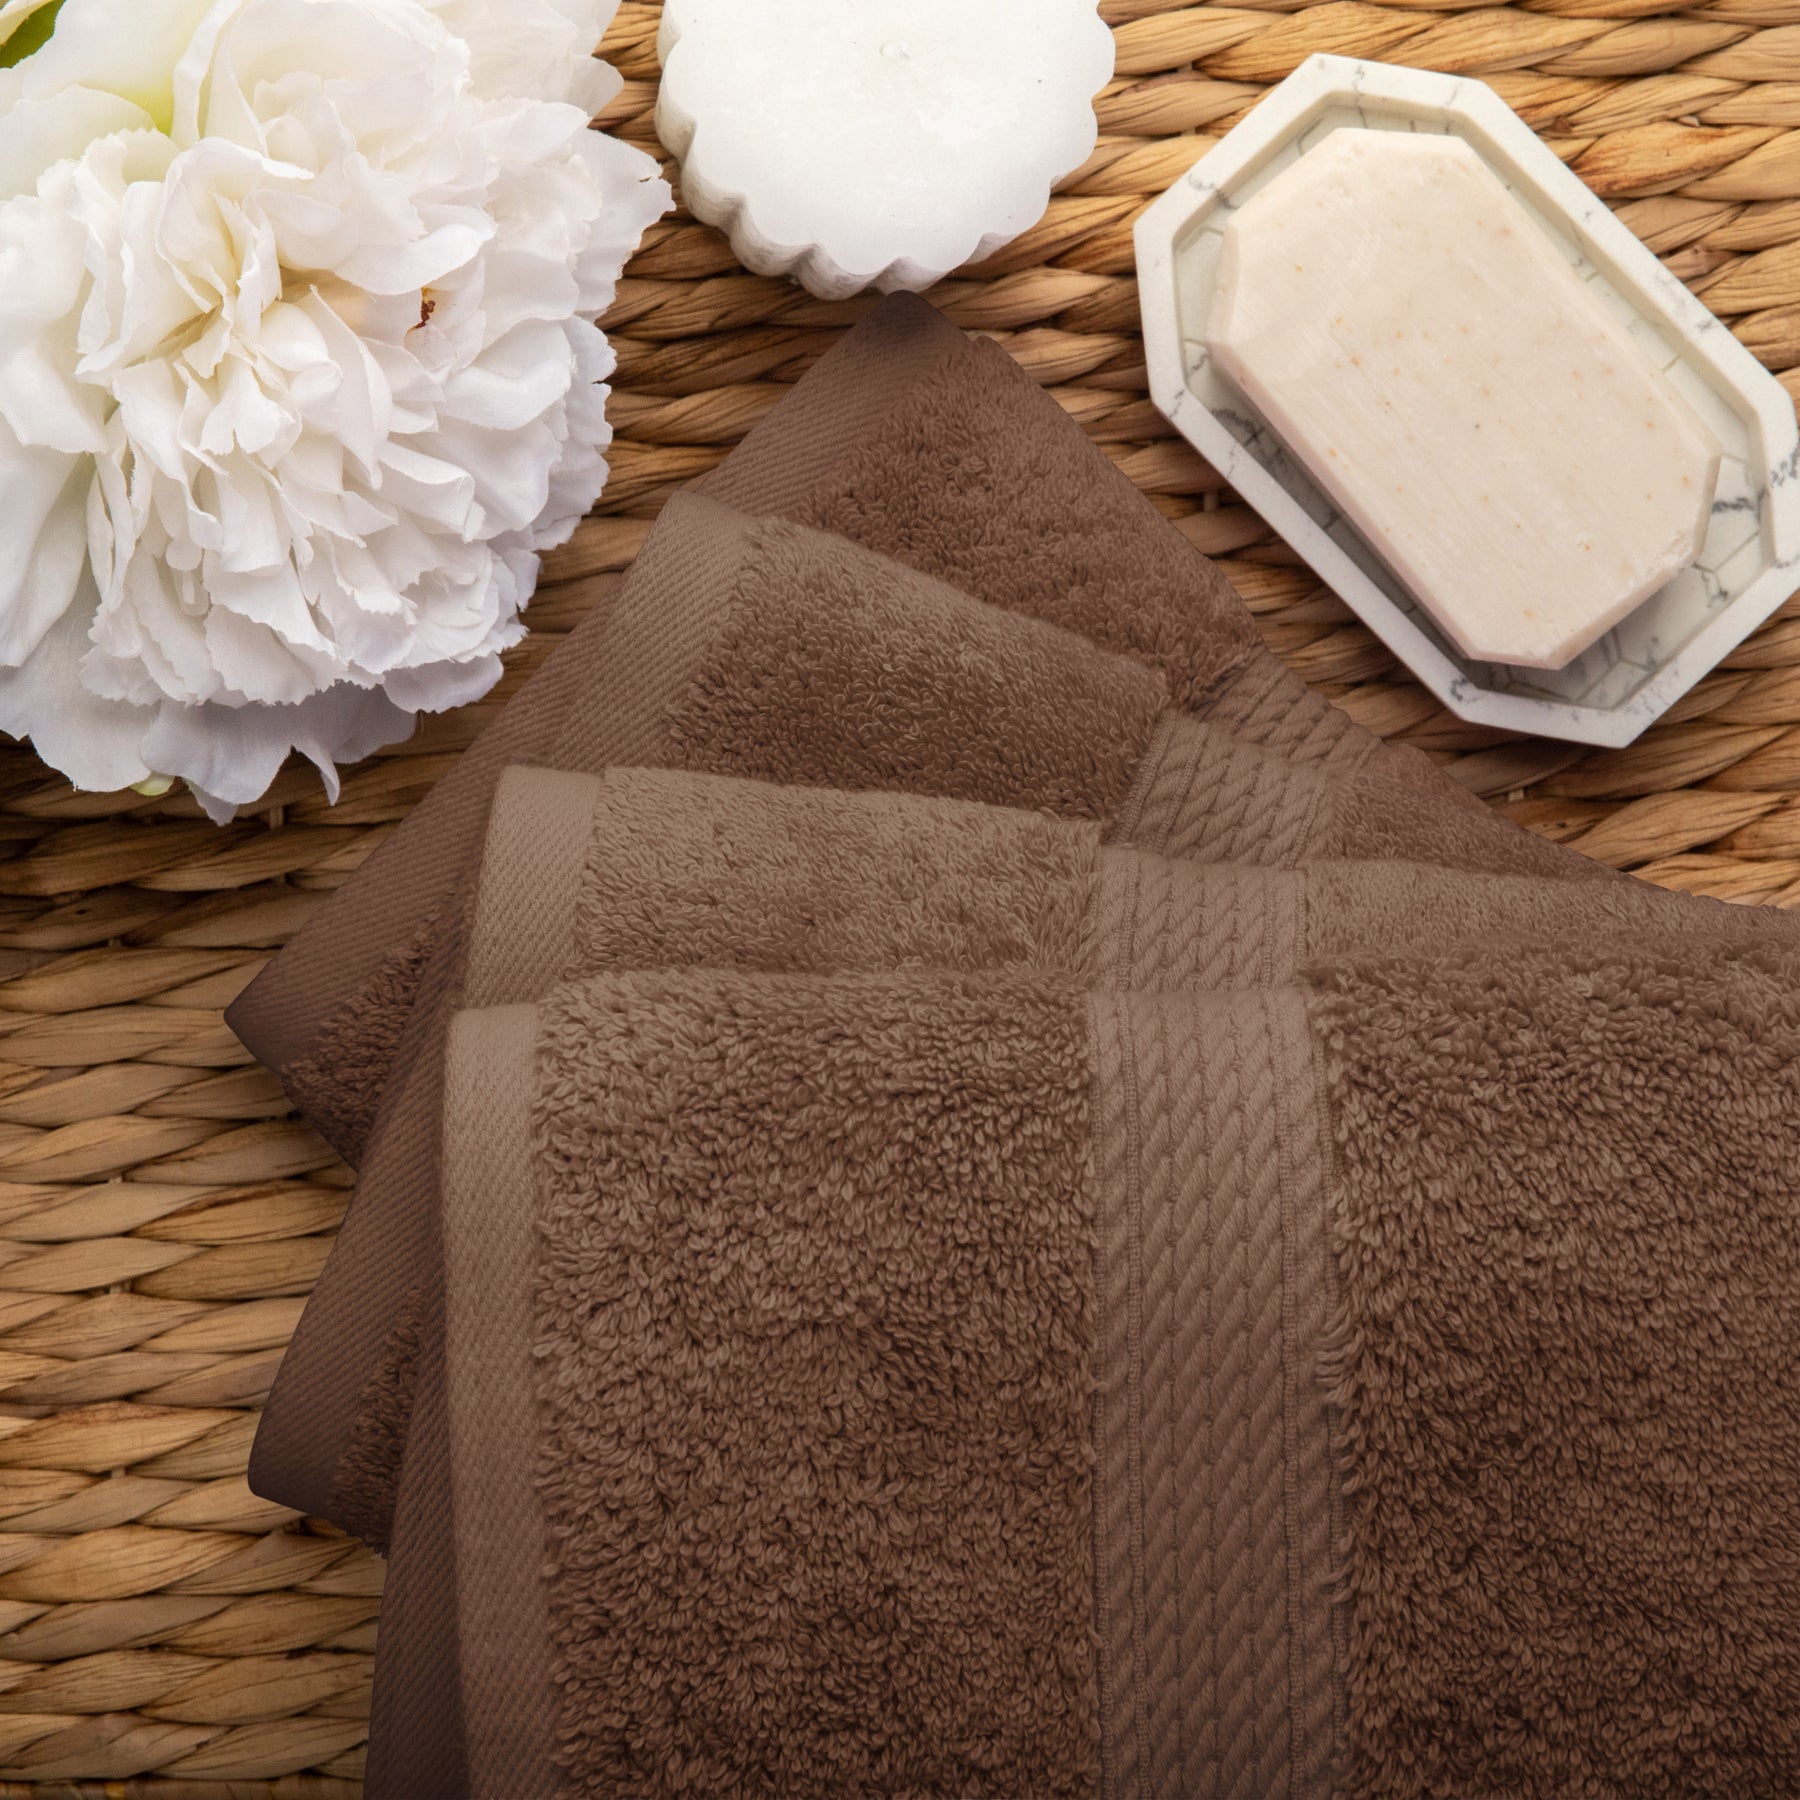 Solid Egyptian Cotton 4 Piece Hand Towel Set - Chocolate